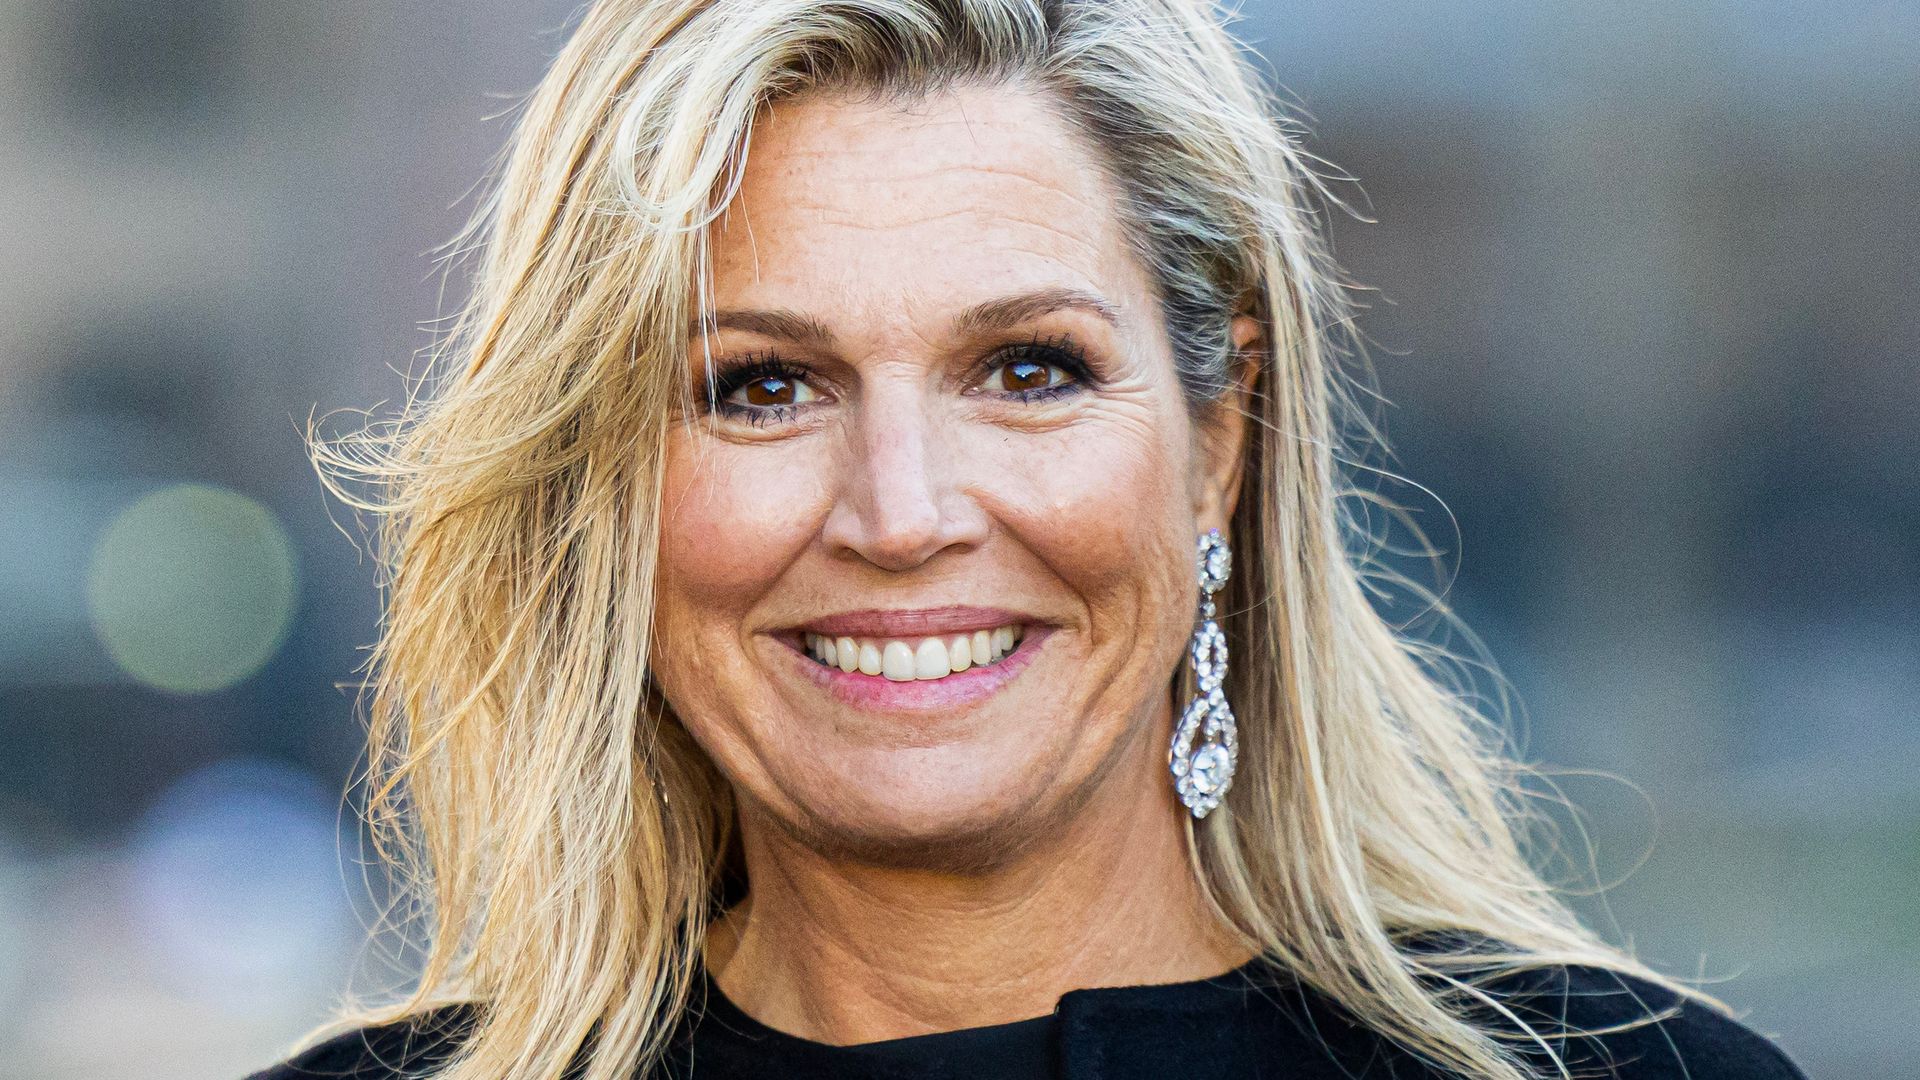 Queen Maxima’s illusion skirt look has fans bewildered – see why